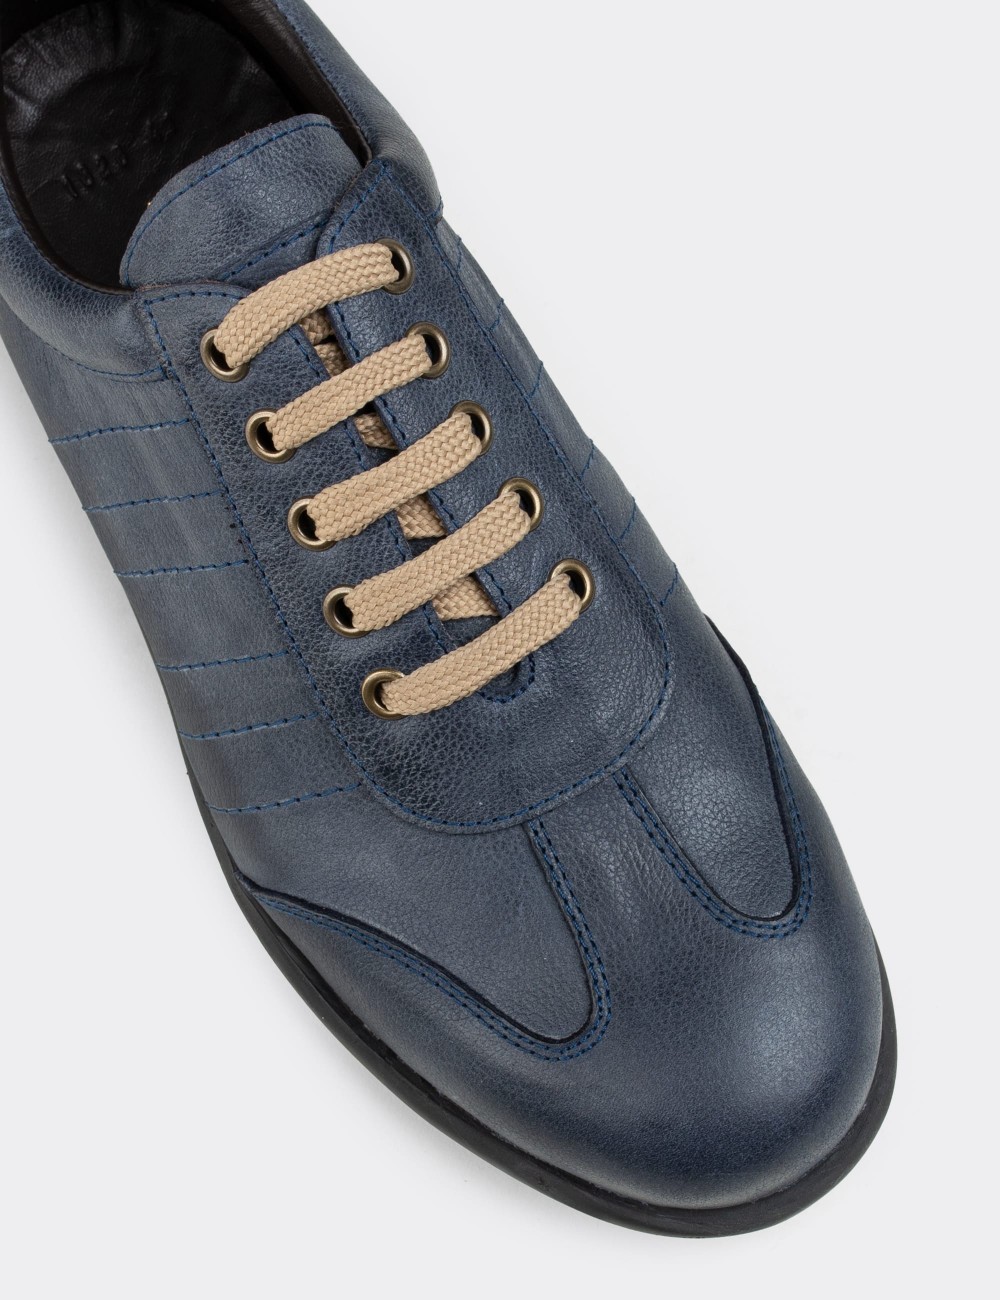 Blue  Leather Lace-up Shoes - 01826MMVIC04